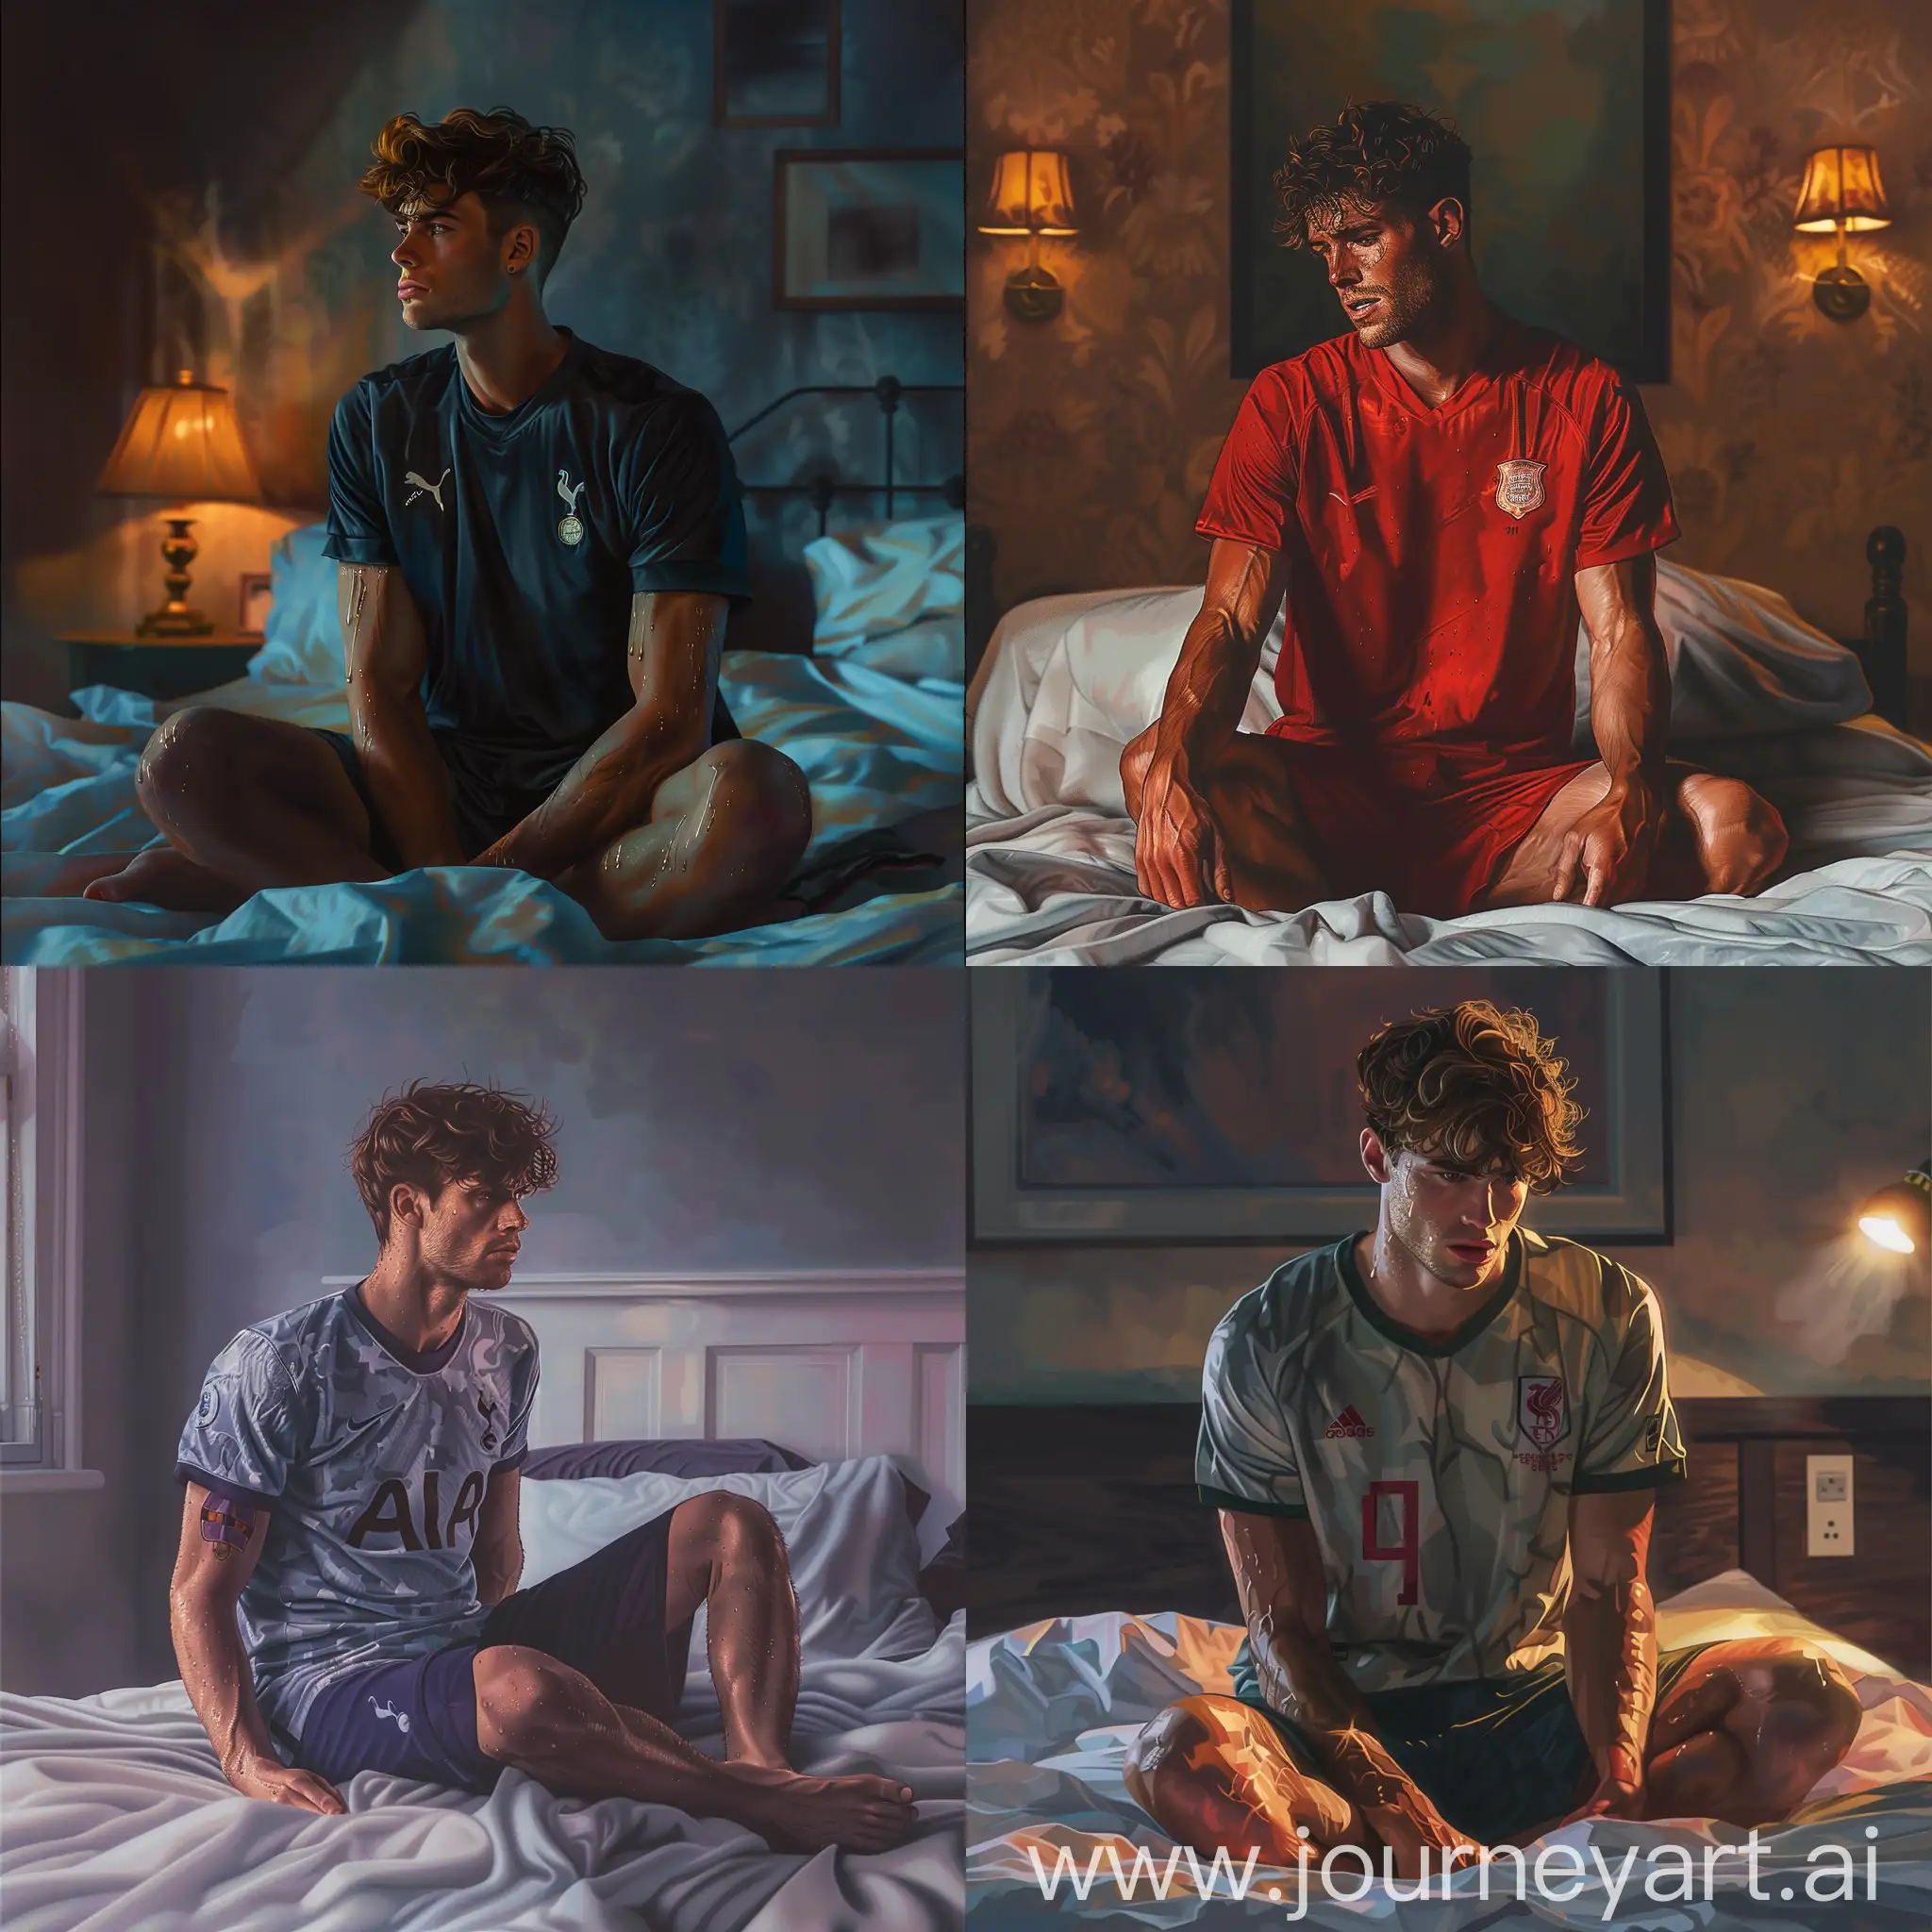 Attractive-Footballer-Relaxing-on-Bed-Candid-Hyper-Realistic-Athlete-at-Night